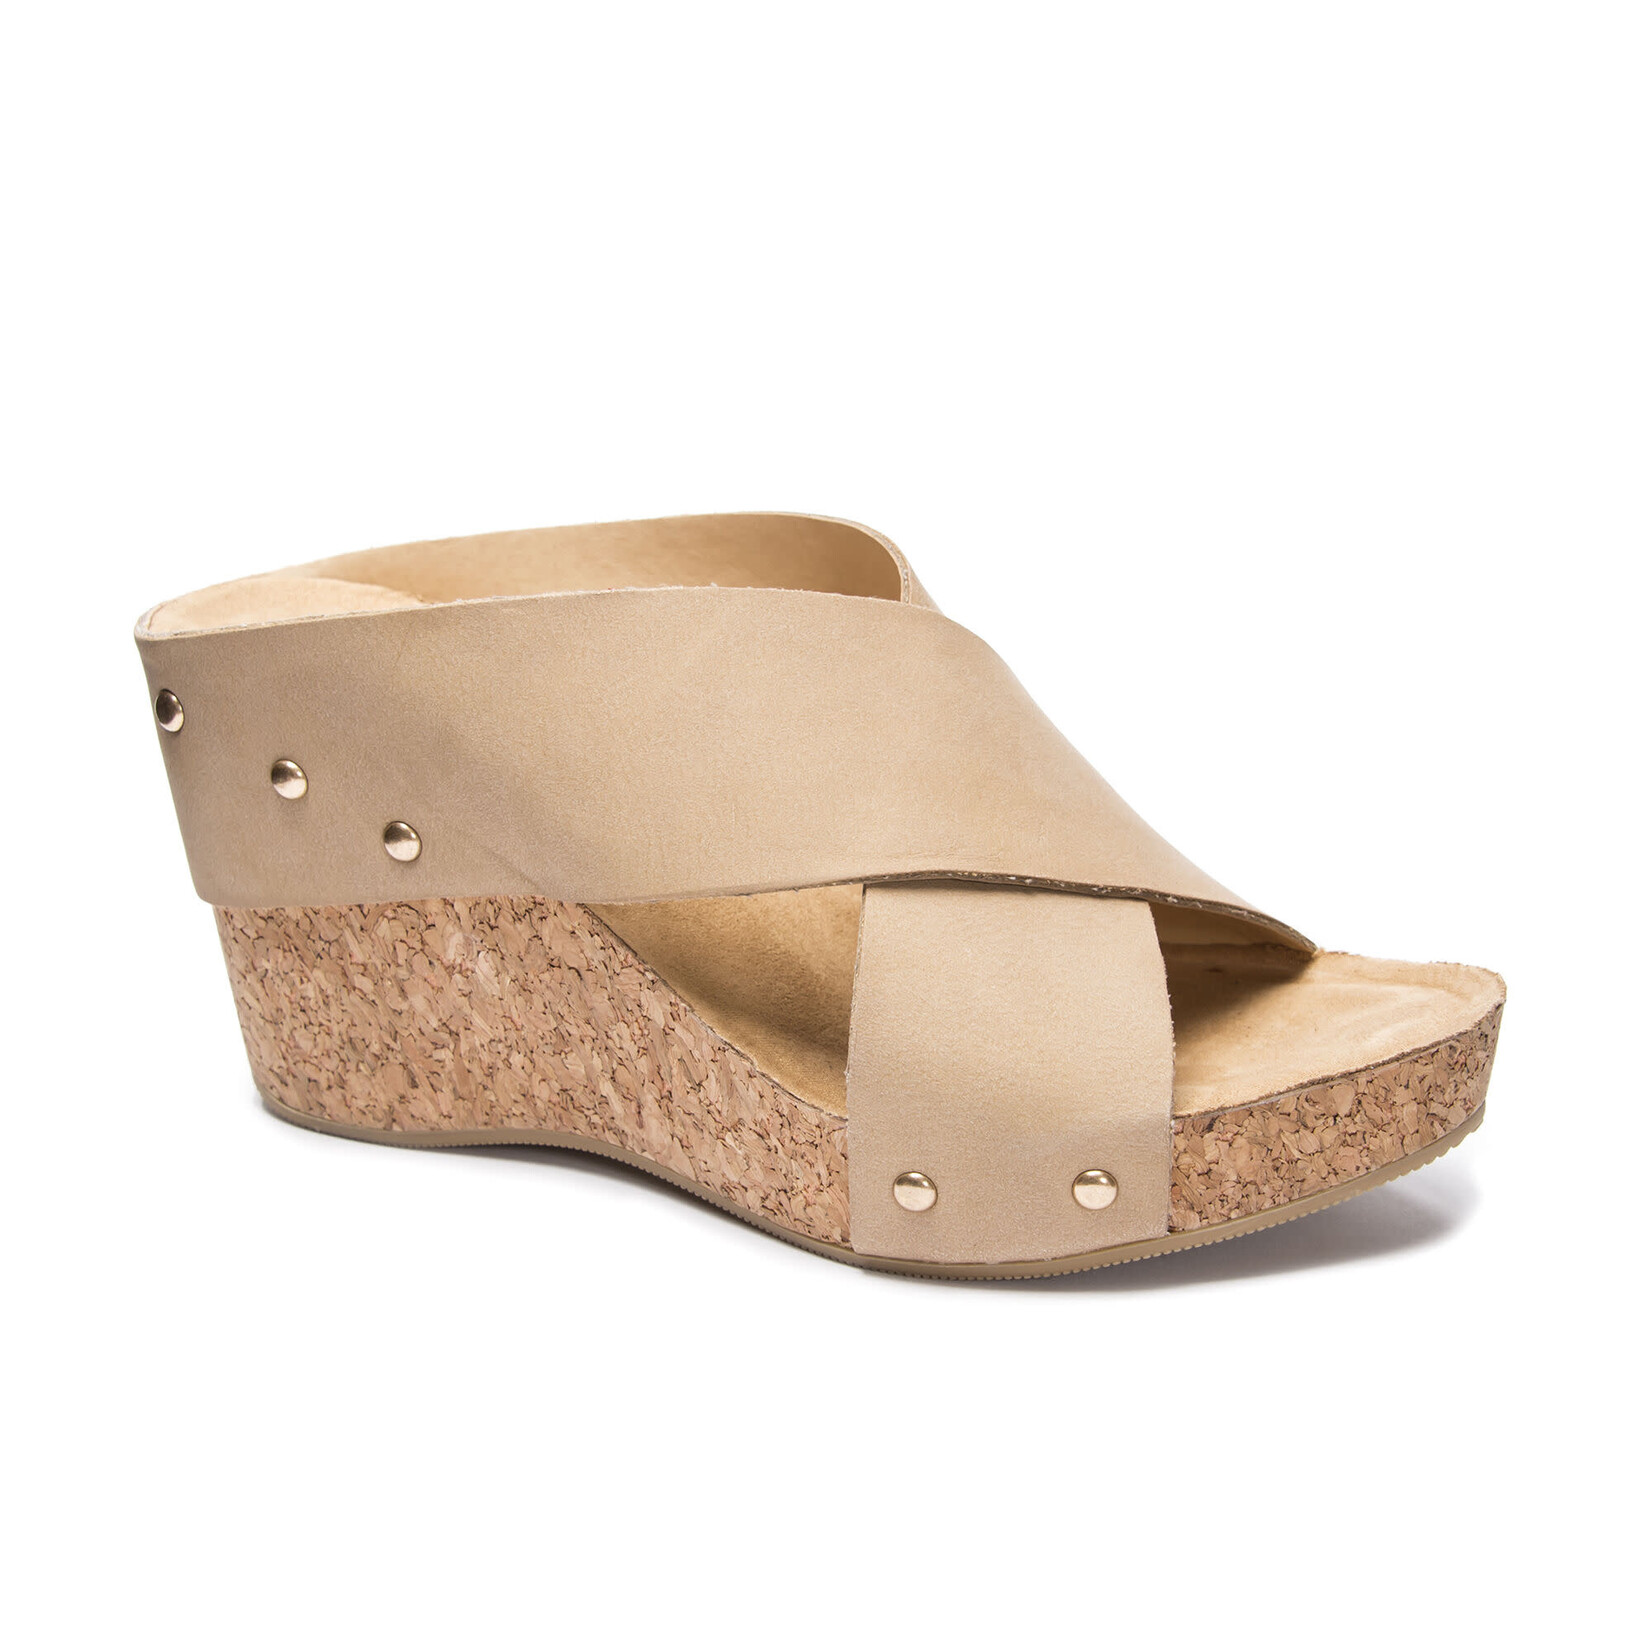 Chinese Laundry Abloom Wedge Sandal